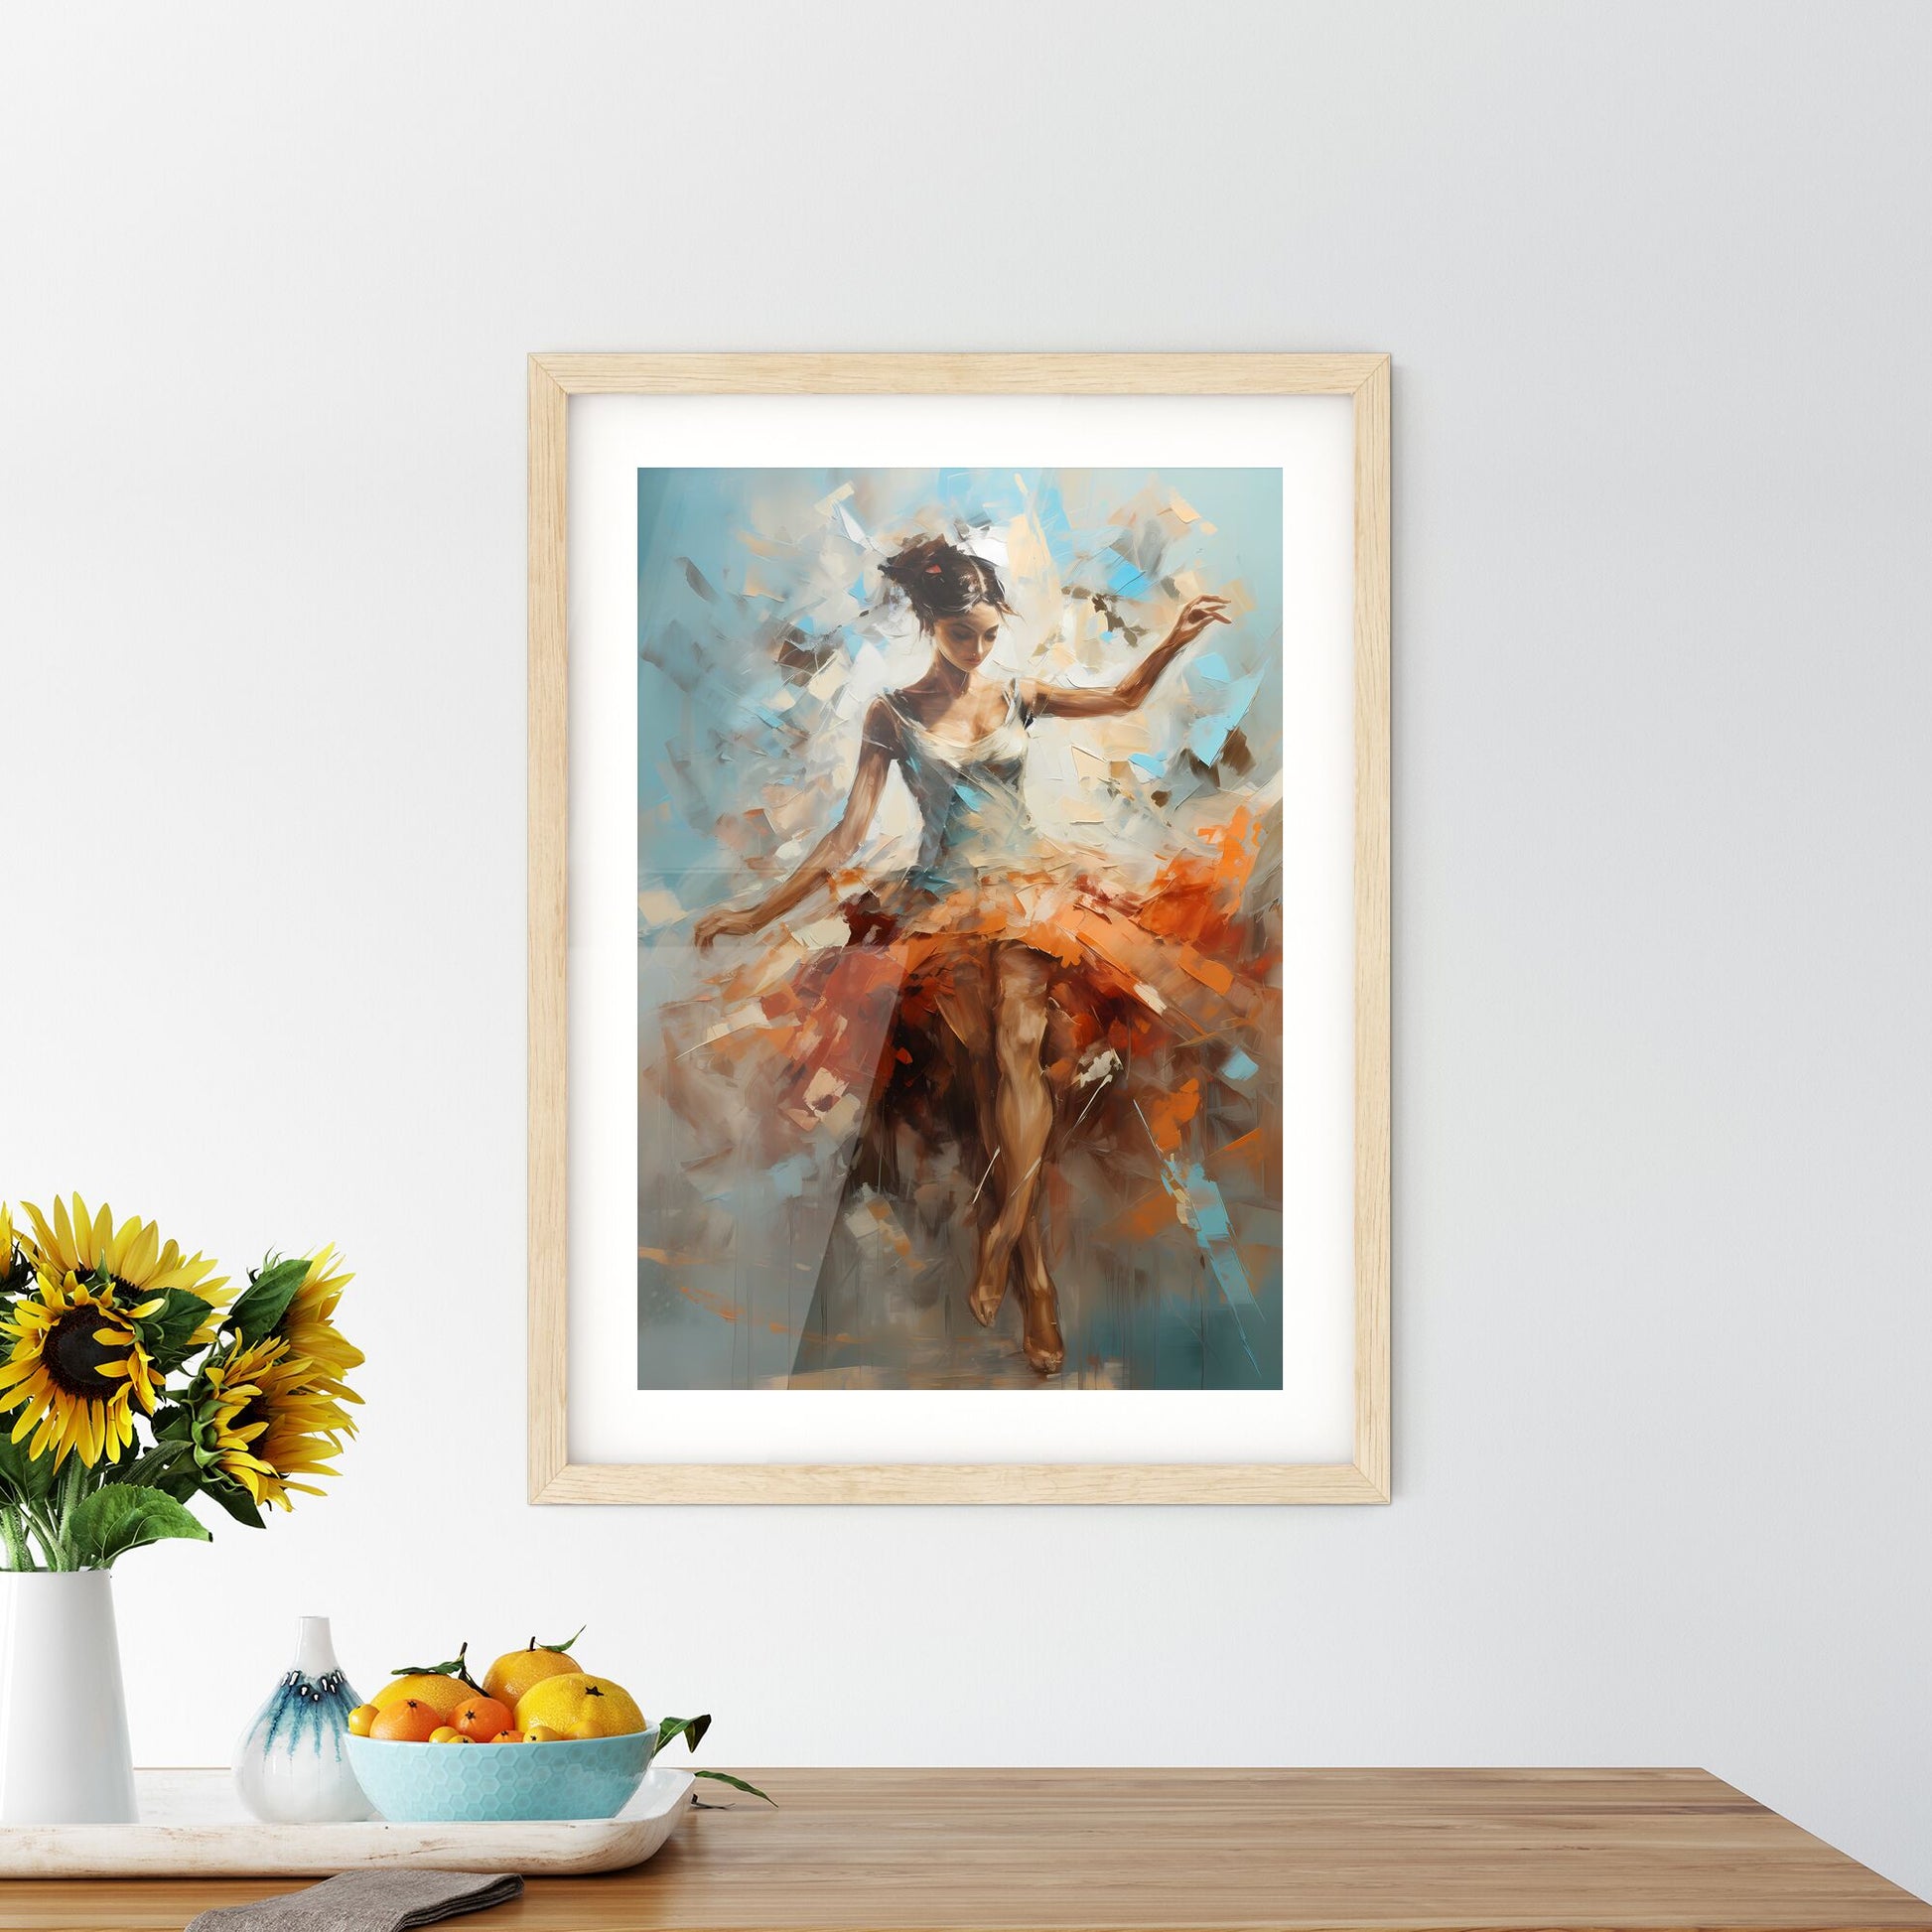 The Ballerina - A Painting Of A Woman In A Dress Default Title